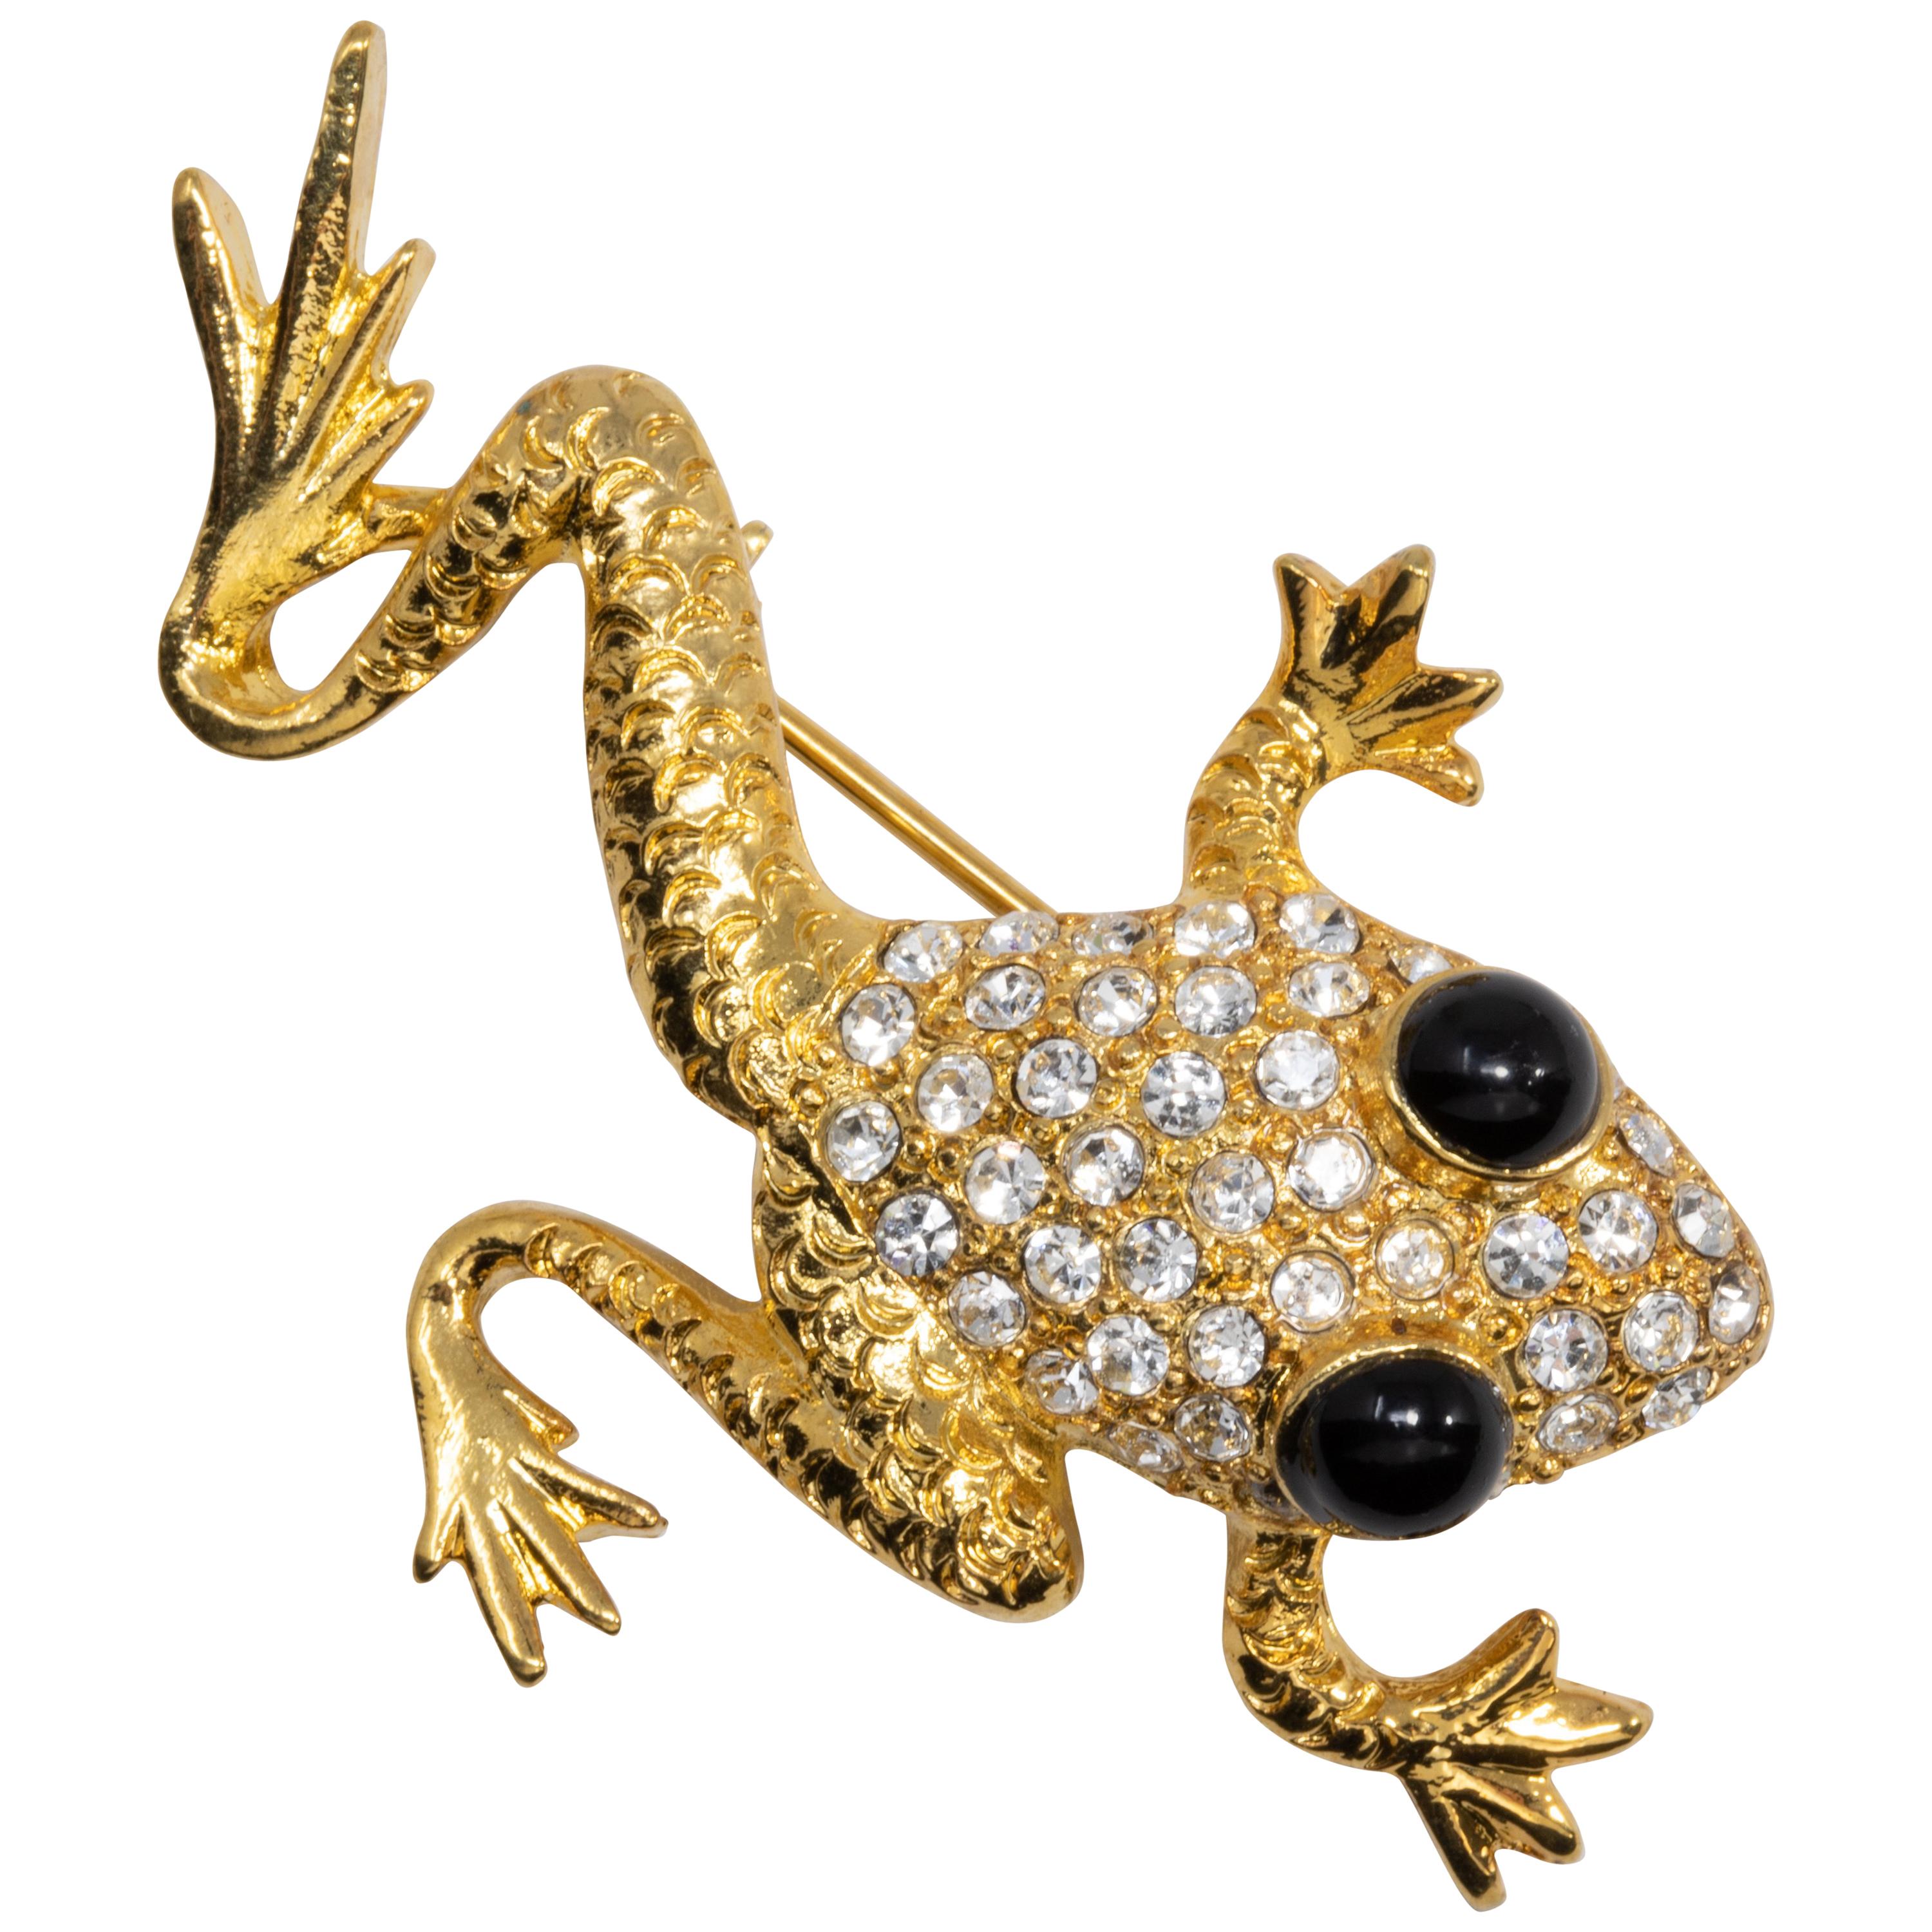 Oscar de la Renta Gold Frog Pin Brooch with Pave Clear Crystals, Black Cabochons For Sale